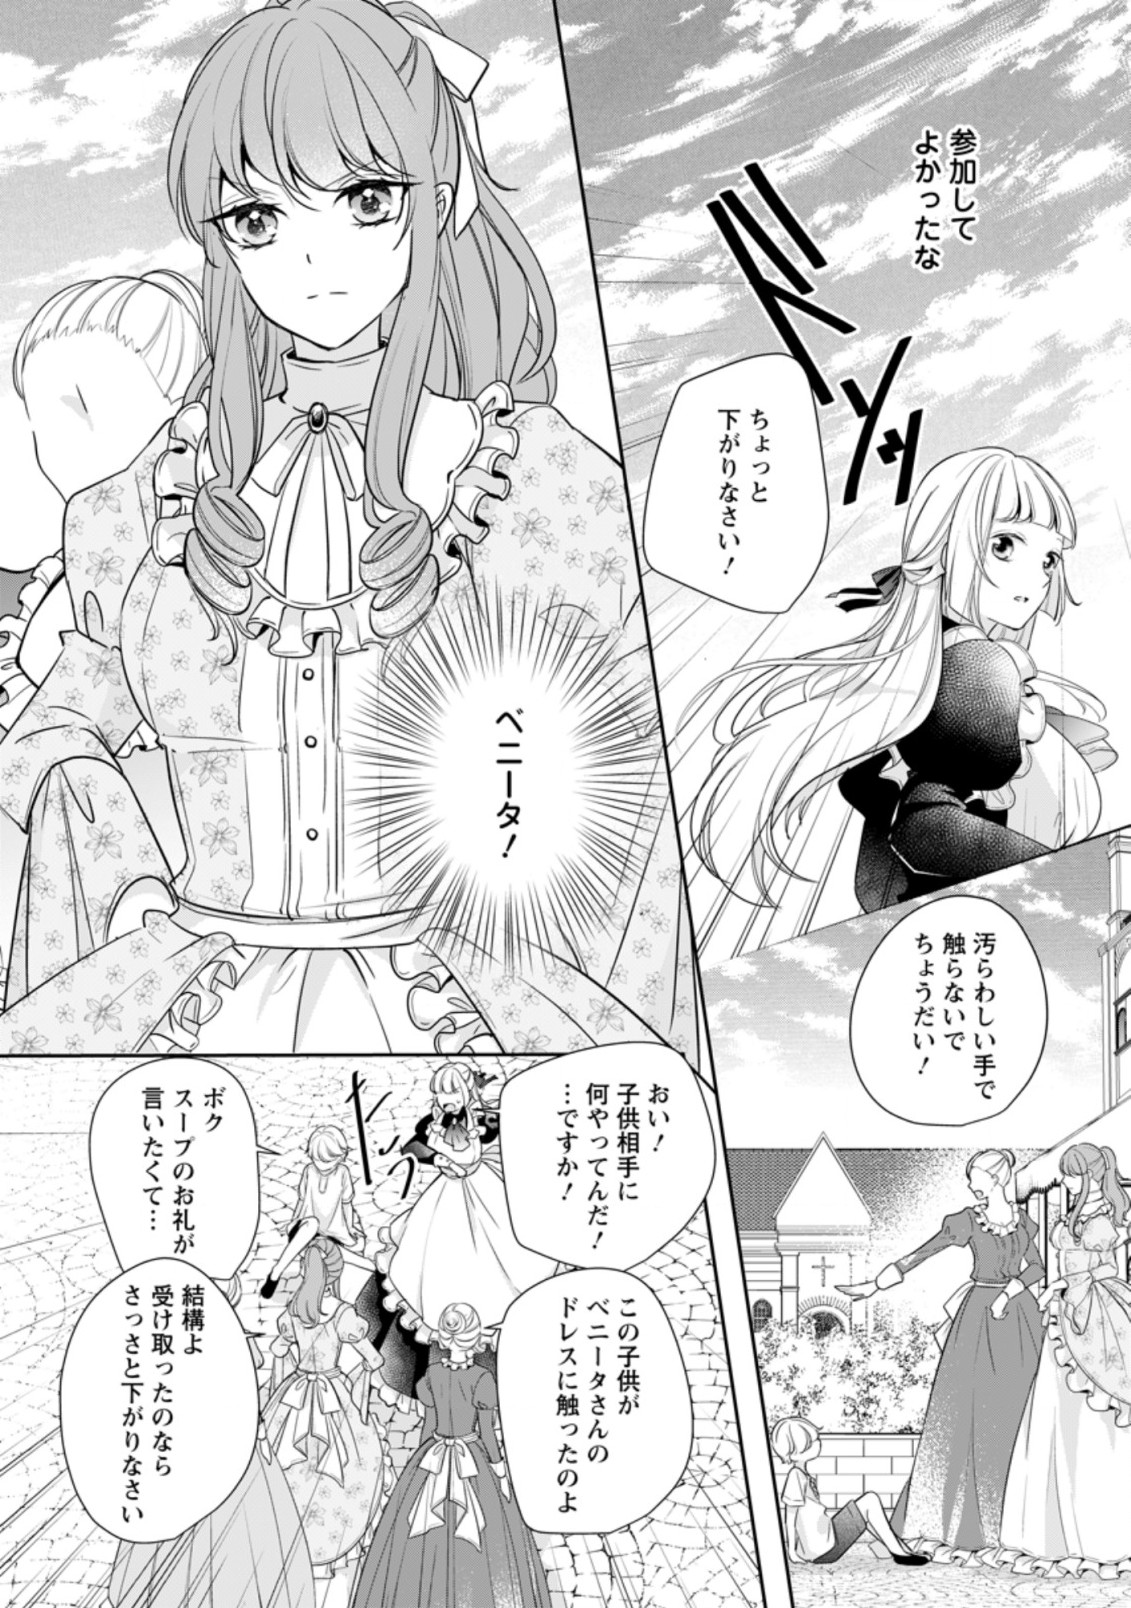 A Bellicose Lady Got Reincarnated!? ~It’s an Impossibly Hard Game Where I Would Die If I Don’t Fall in Love - Chapter 13.2 - Page 2